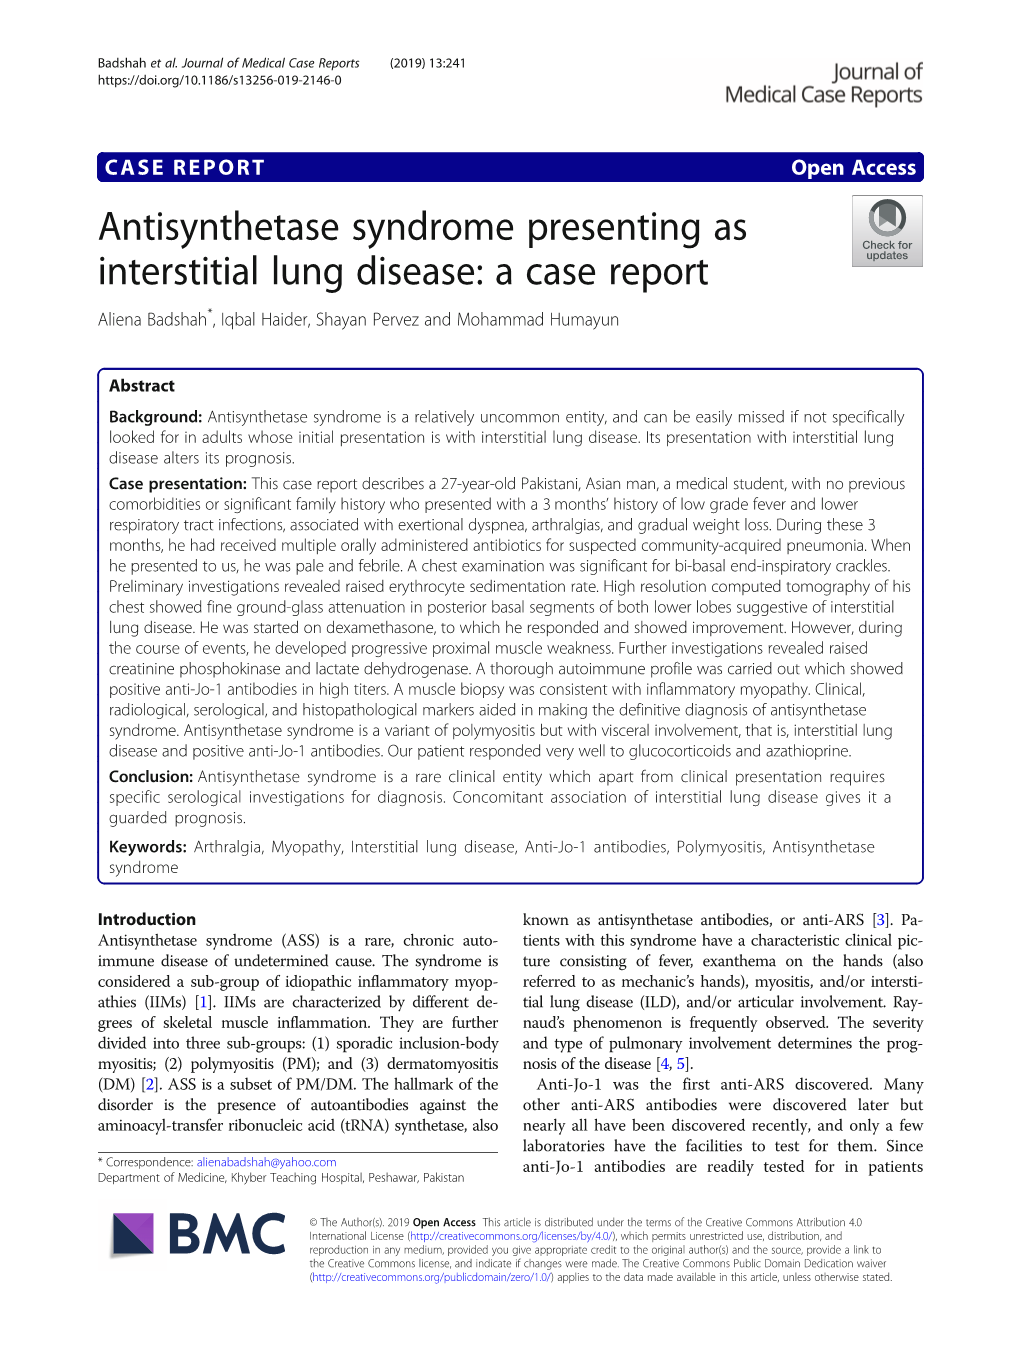 Antisynthetase Syndrome Presenting As Interstitial Lung Disease: a Case Report Aliena Badshah*, Iqbal Haider, Shayan Pervez and Mohammad Humayun